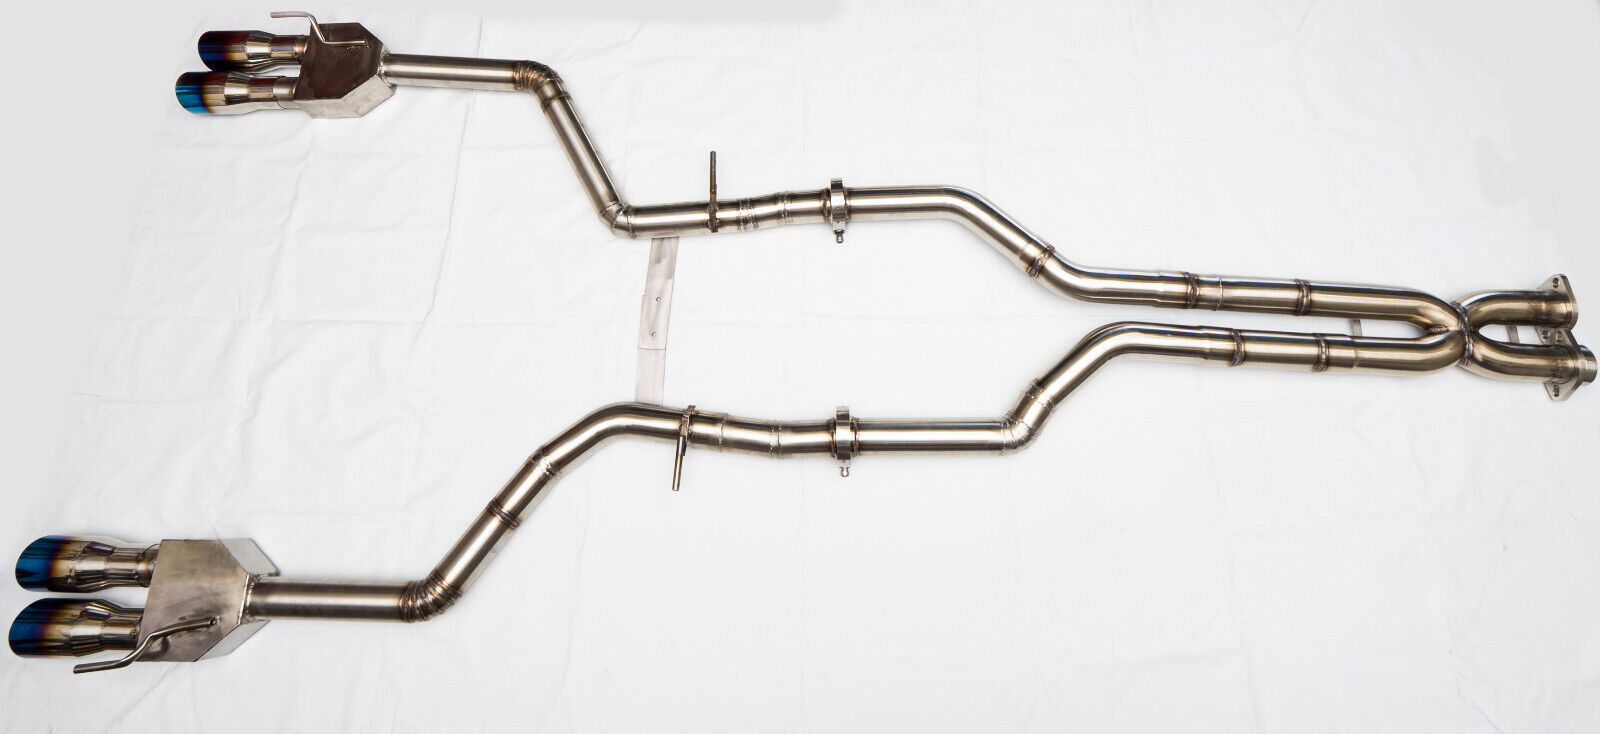 STAINLESS STEEL EXHAUST SYSTEM 2000-2006 MERCEDES-BENZ W220 S Class S500 S55 AMG